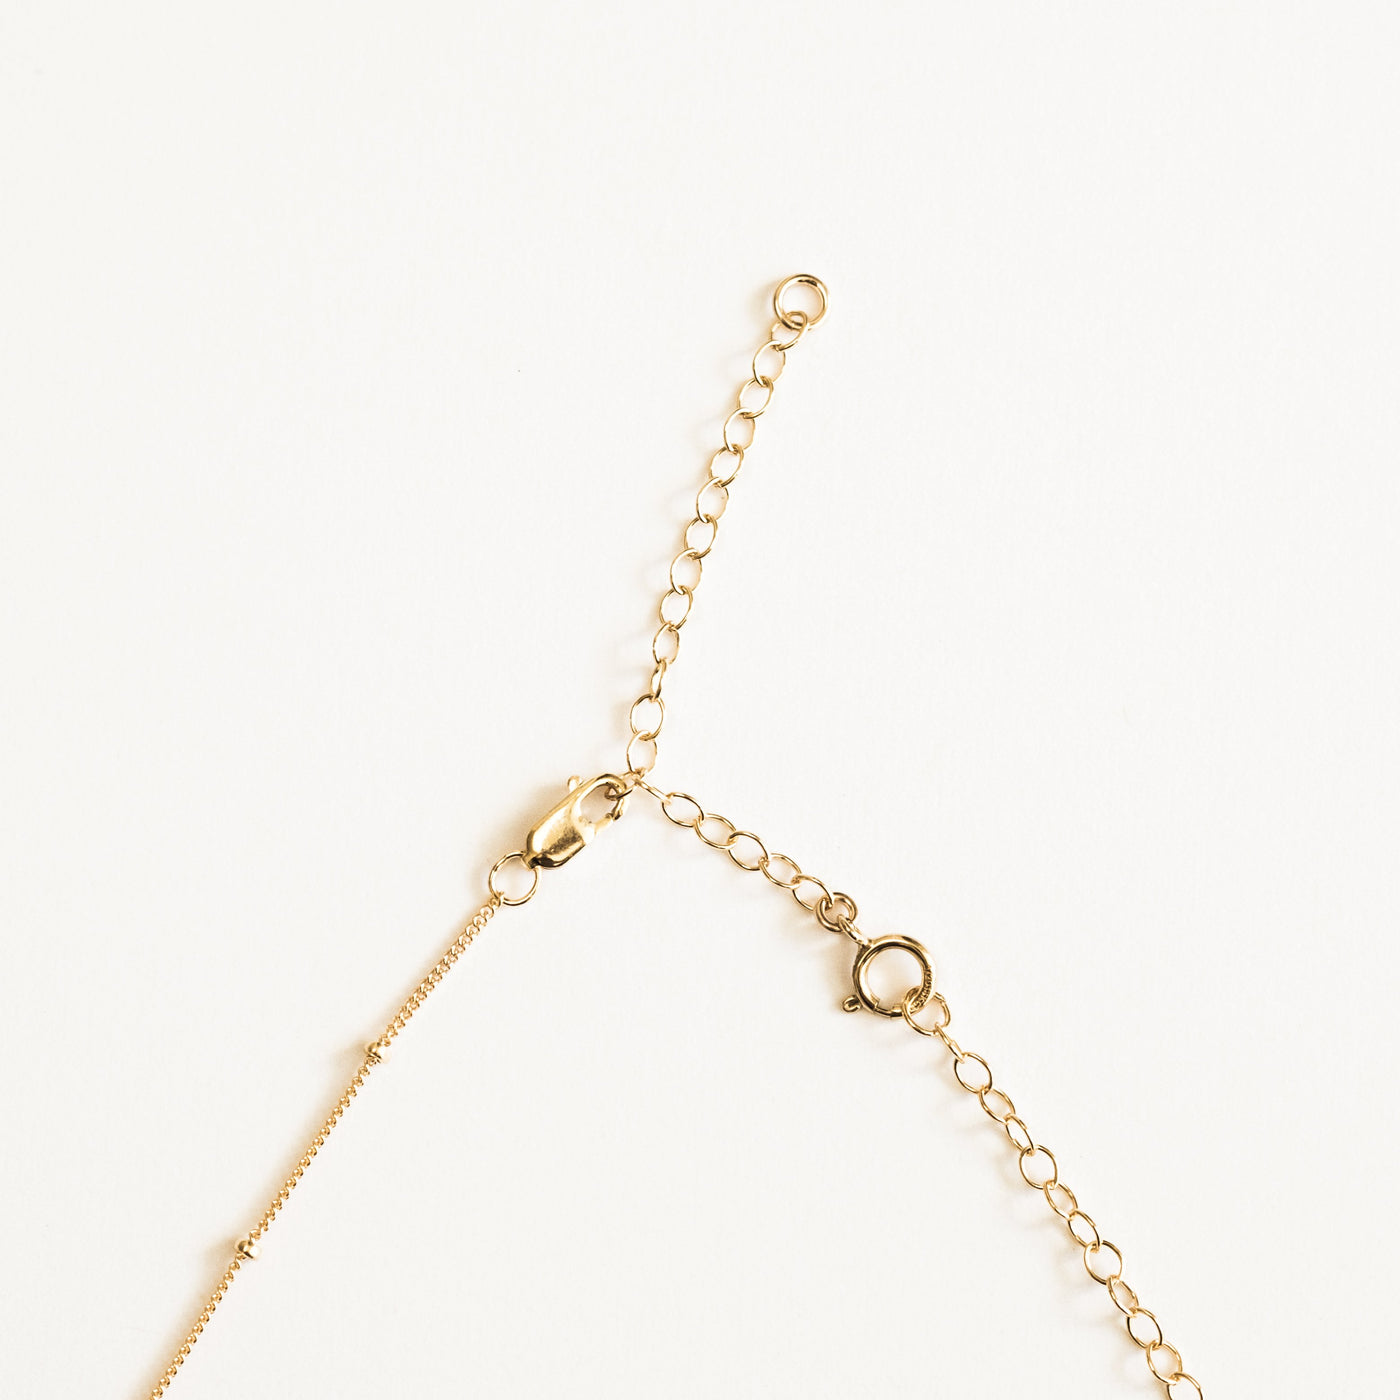 Removable Extender by Simple & Dainty Jewelry